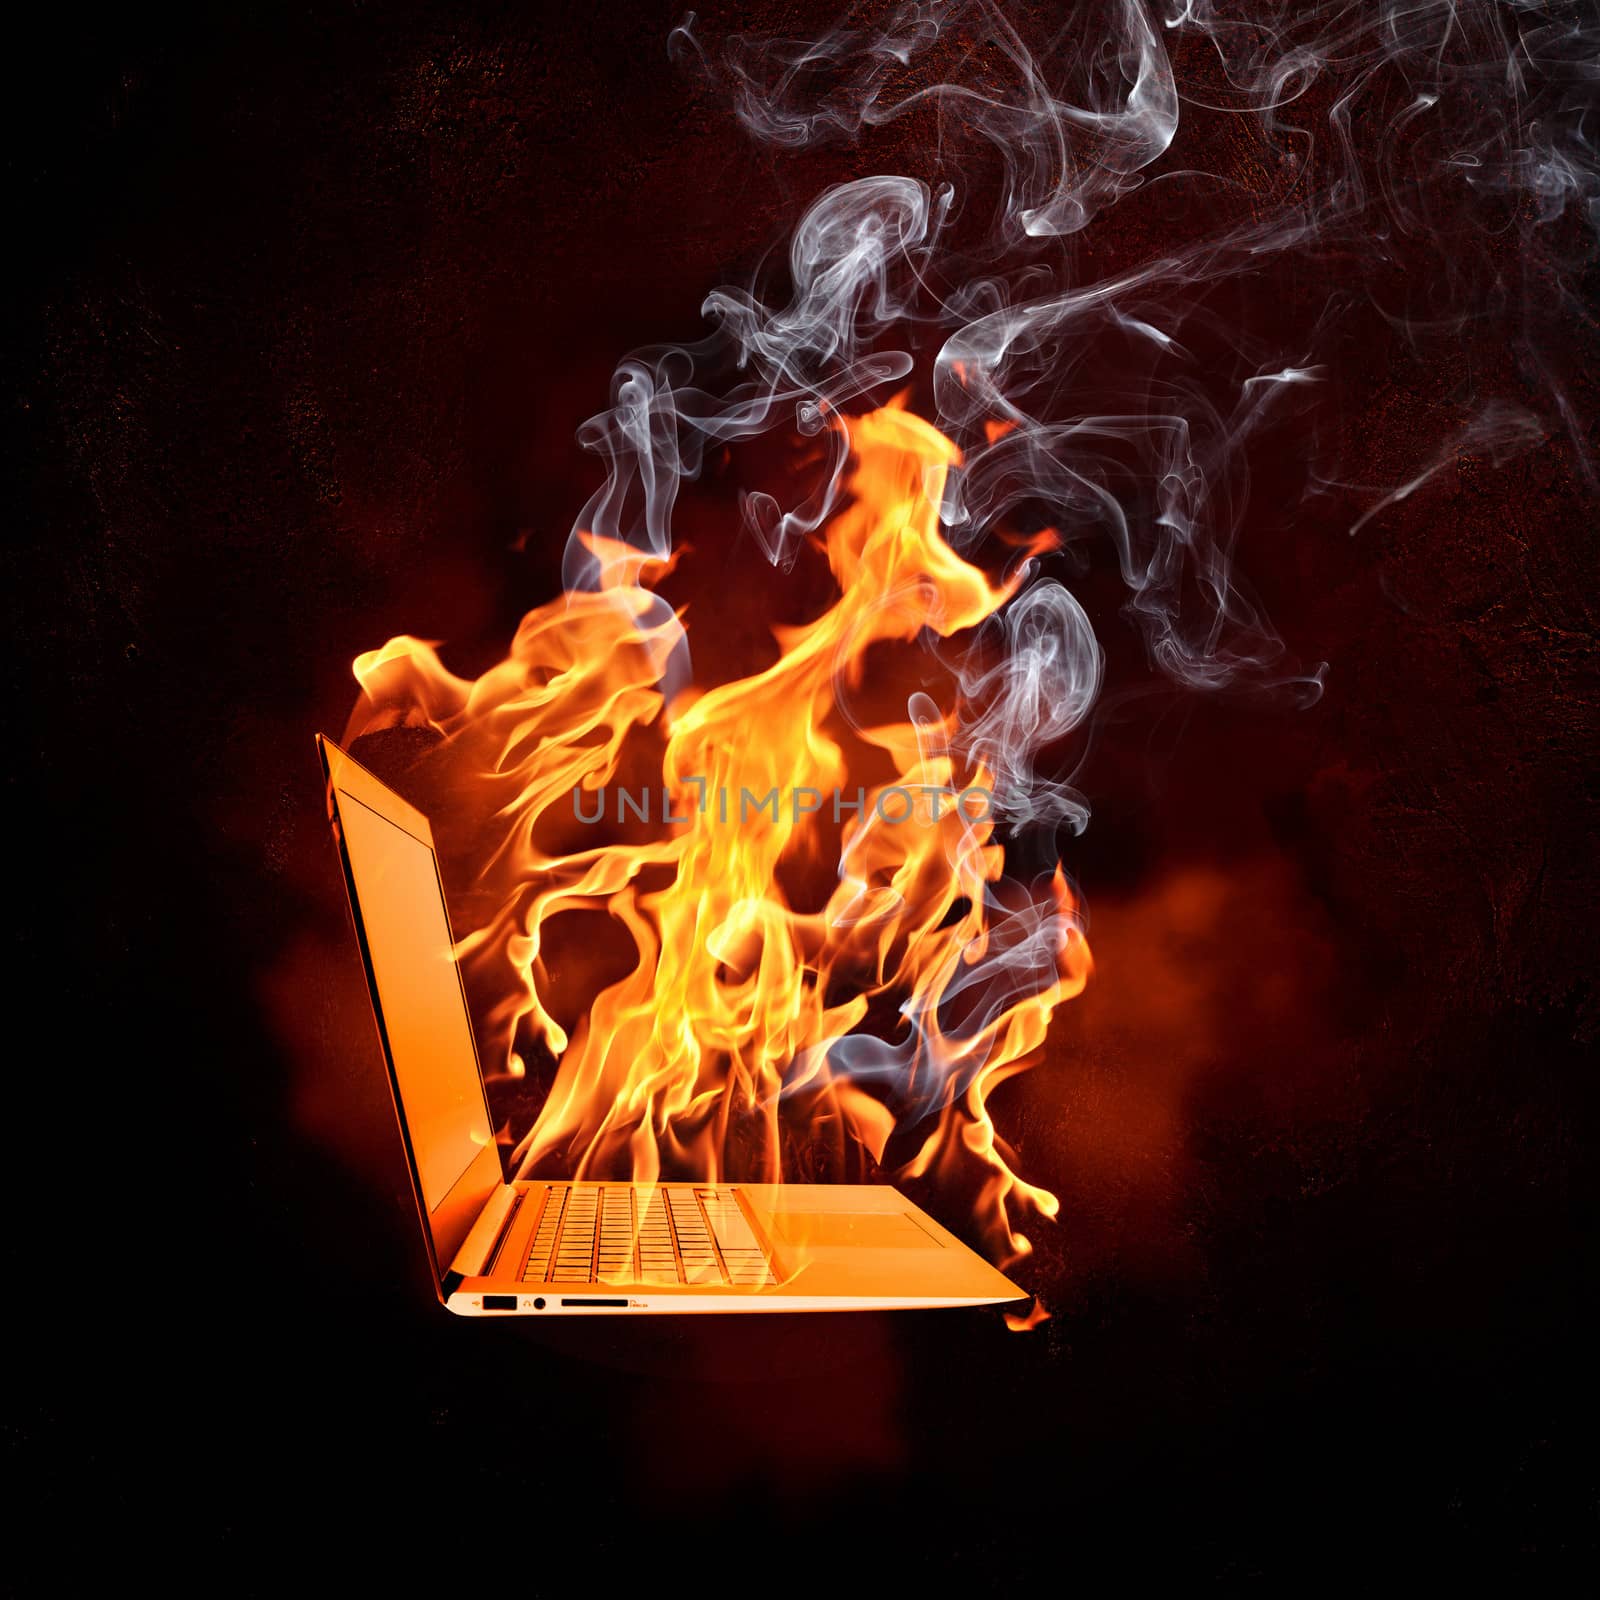 Laptop in fire flames by sergey_nivens